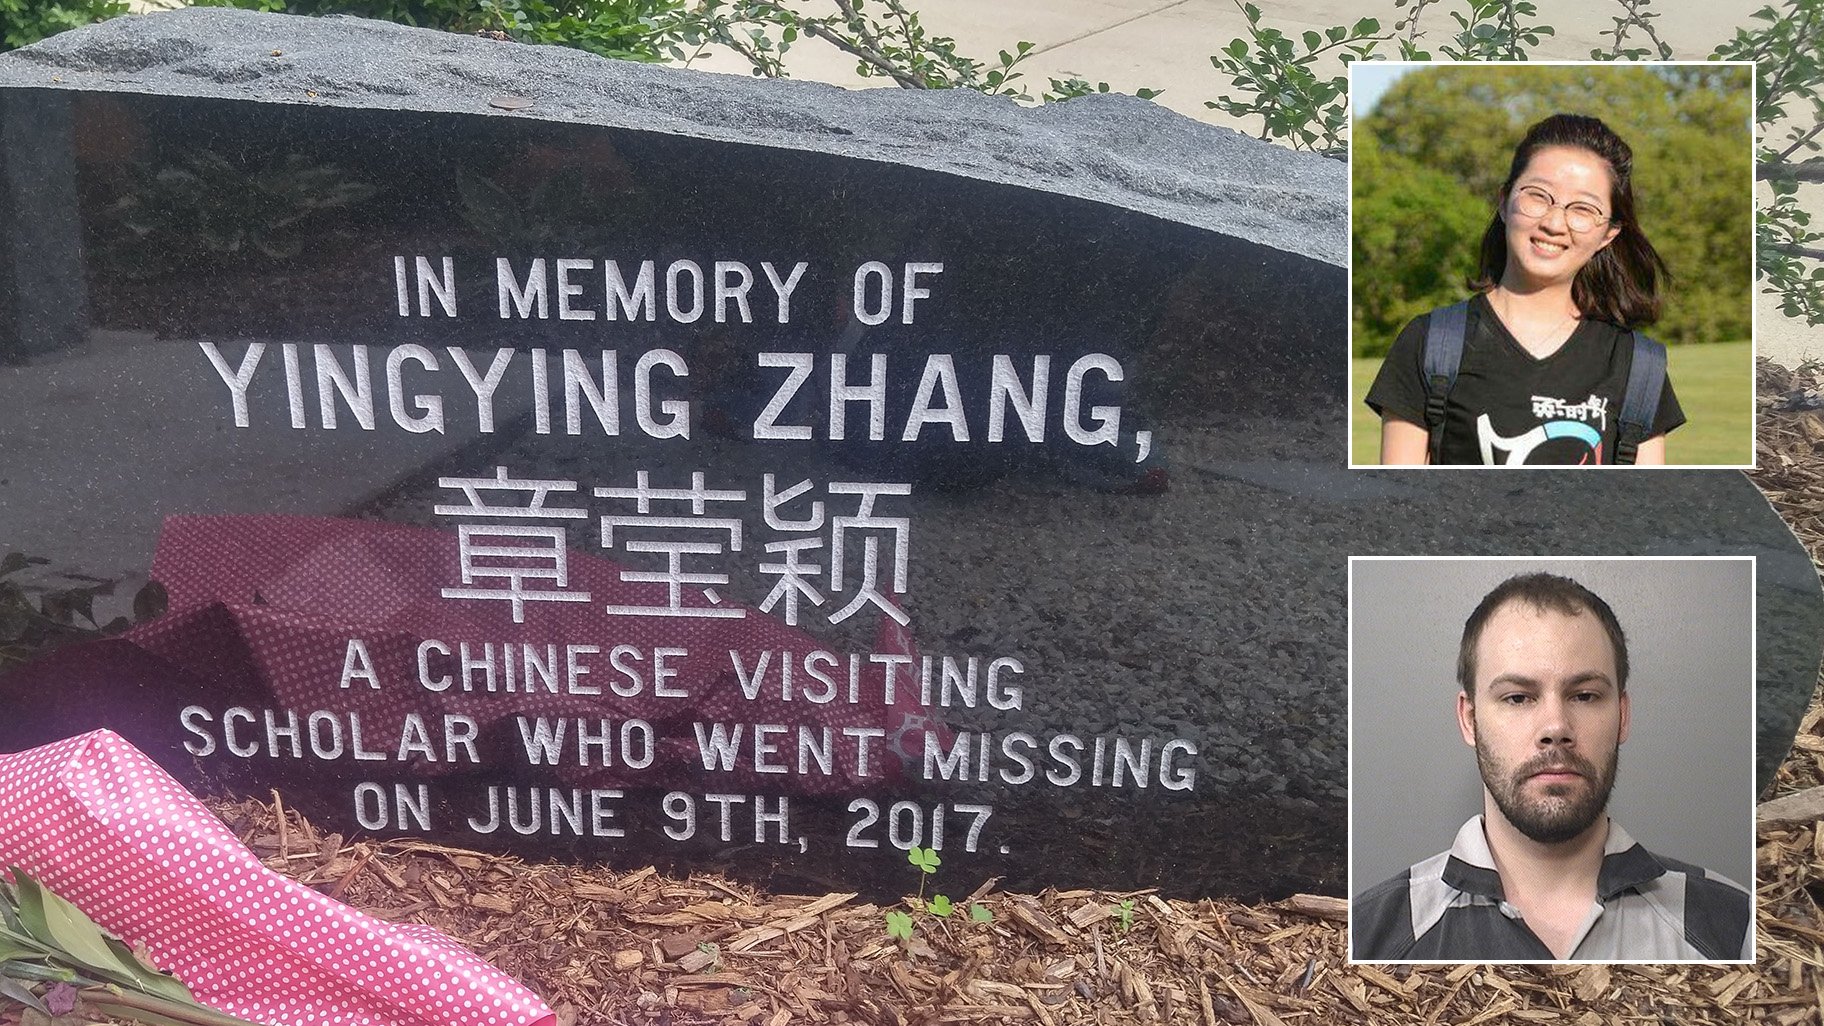 A memorial stone engraved with Yingying Zhang’s name in both English and Chinese on the campus of the University of Illinois at Urbana-Champaign in June 2019, two years after her disappearance. (Photo by Mark Van Moer) Inset, top: Yingying Zhang (Courtesy University of Illinois Police Department). Bottom: Brendt Christensen (Courtesy Macon County Sheriff’s Department).